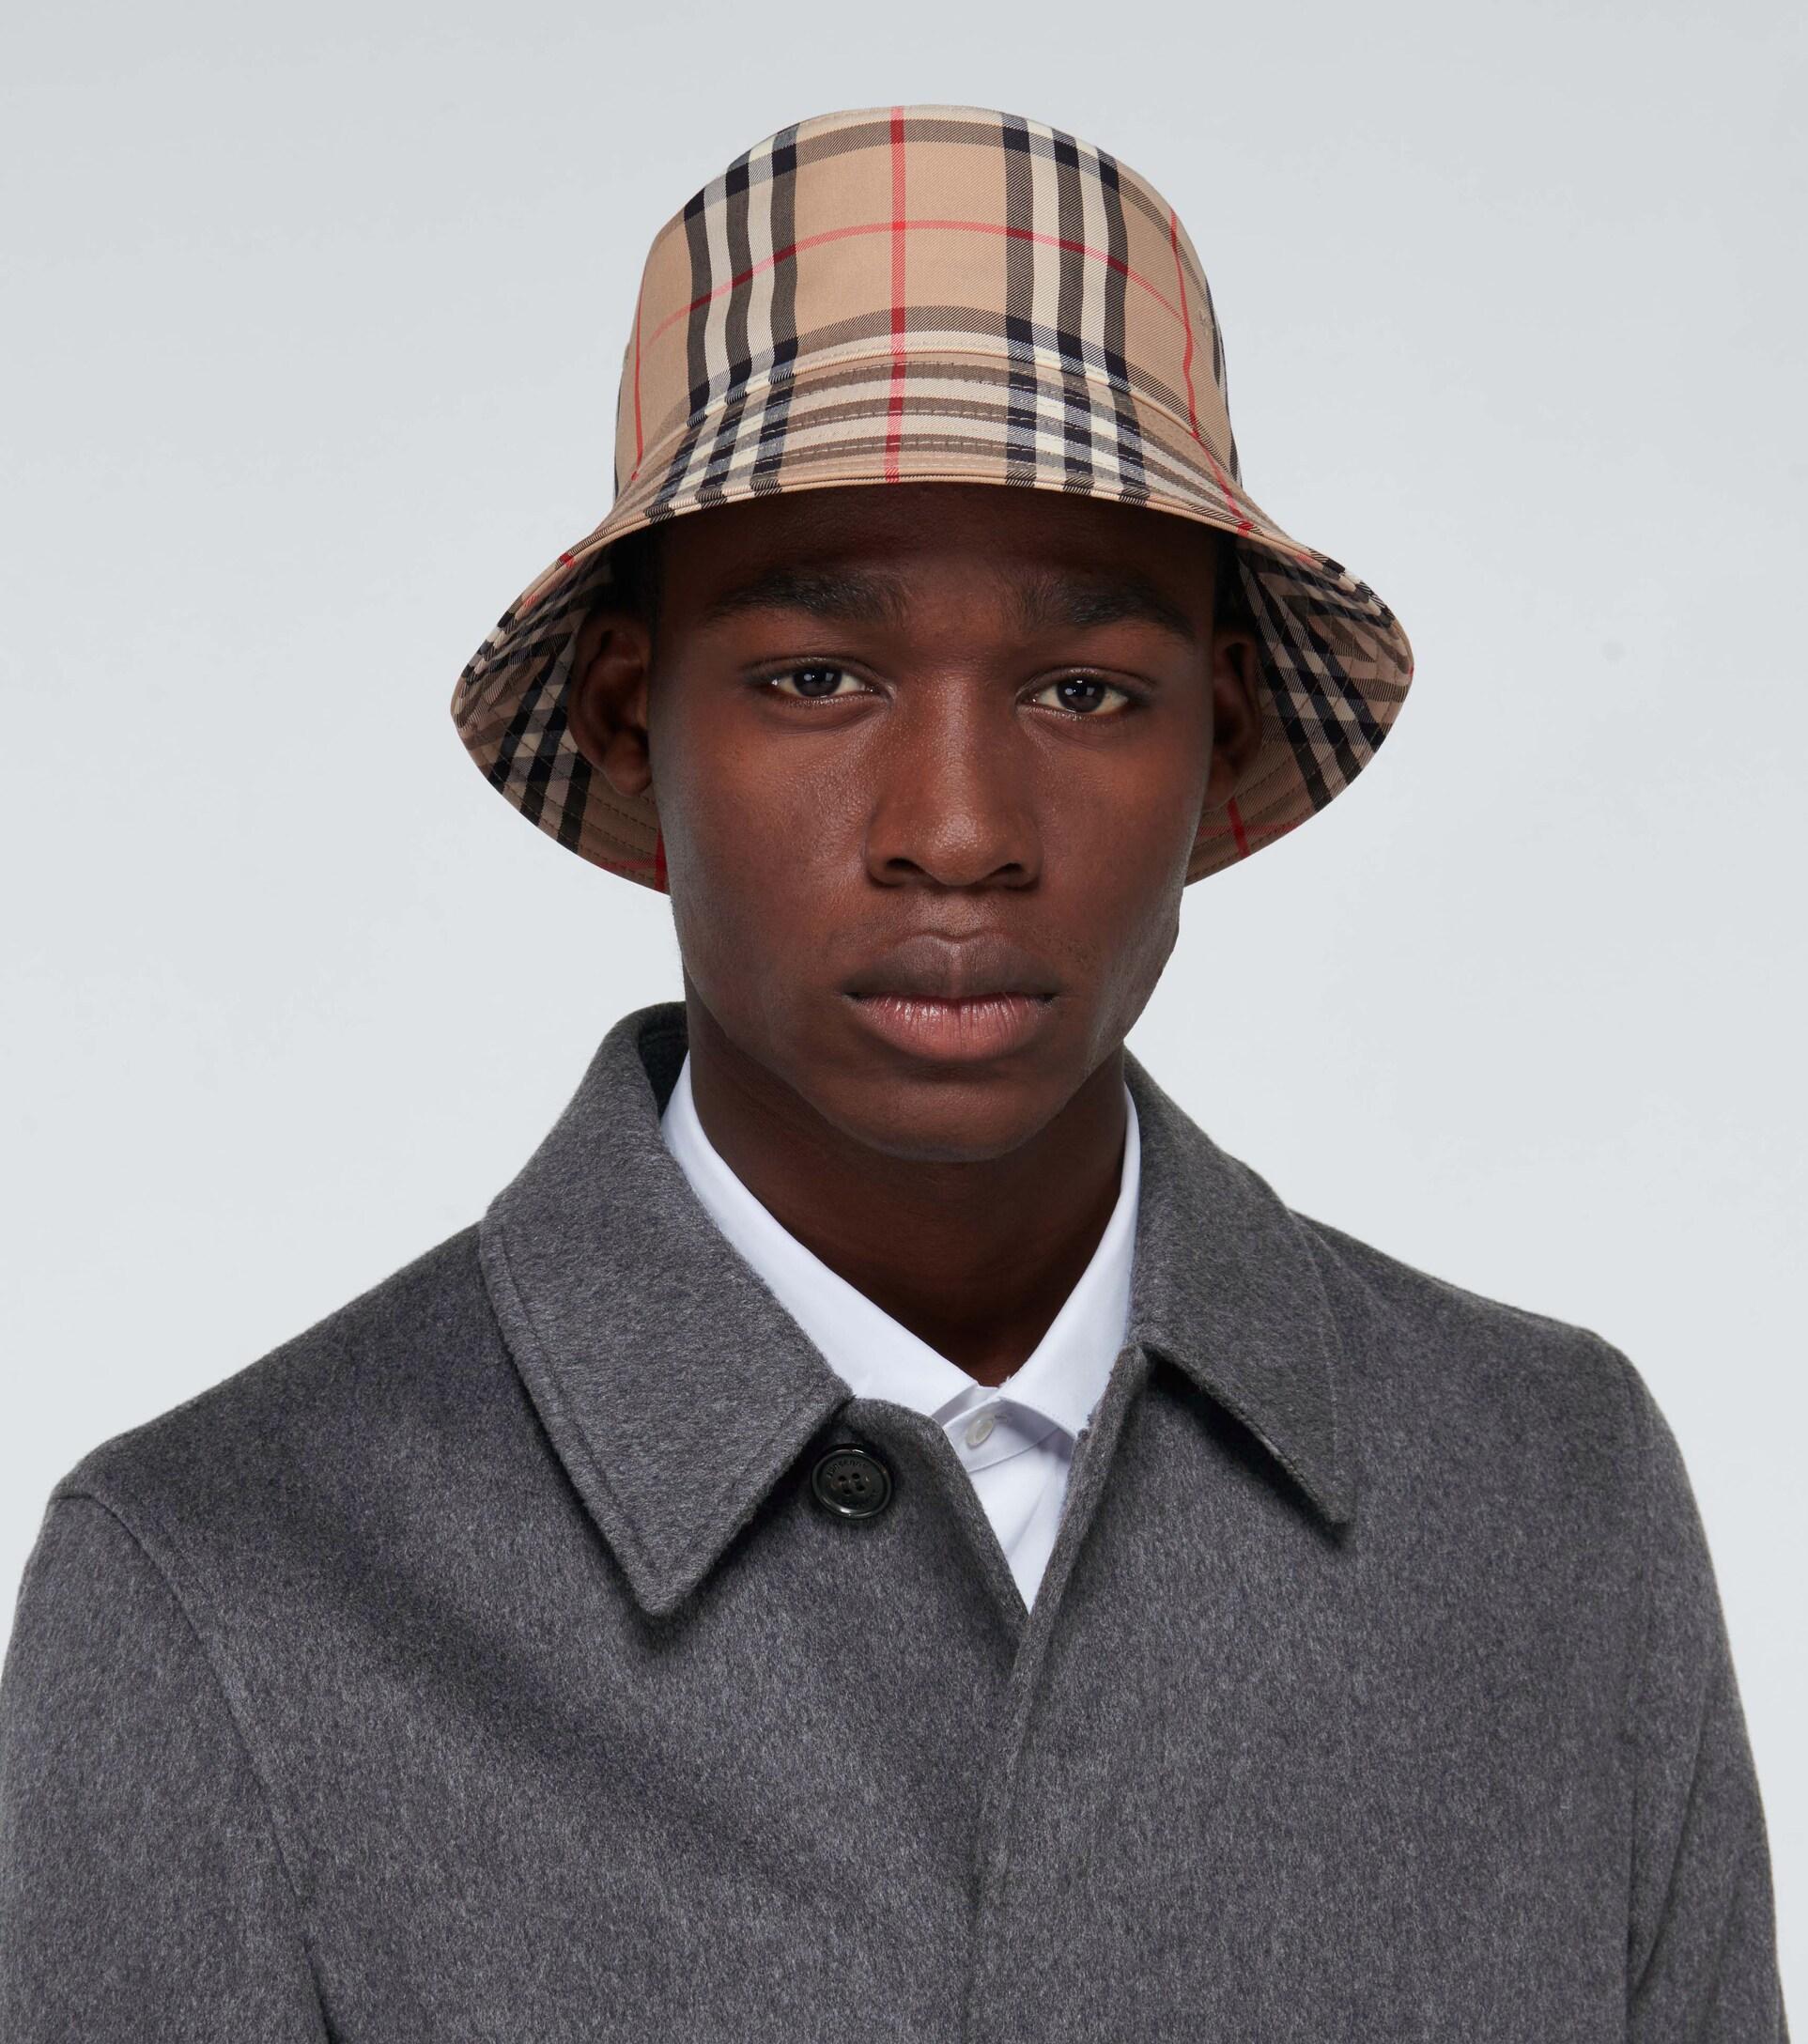 Burberry Vintage Check Bucket Hat in Natural for Men